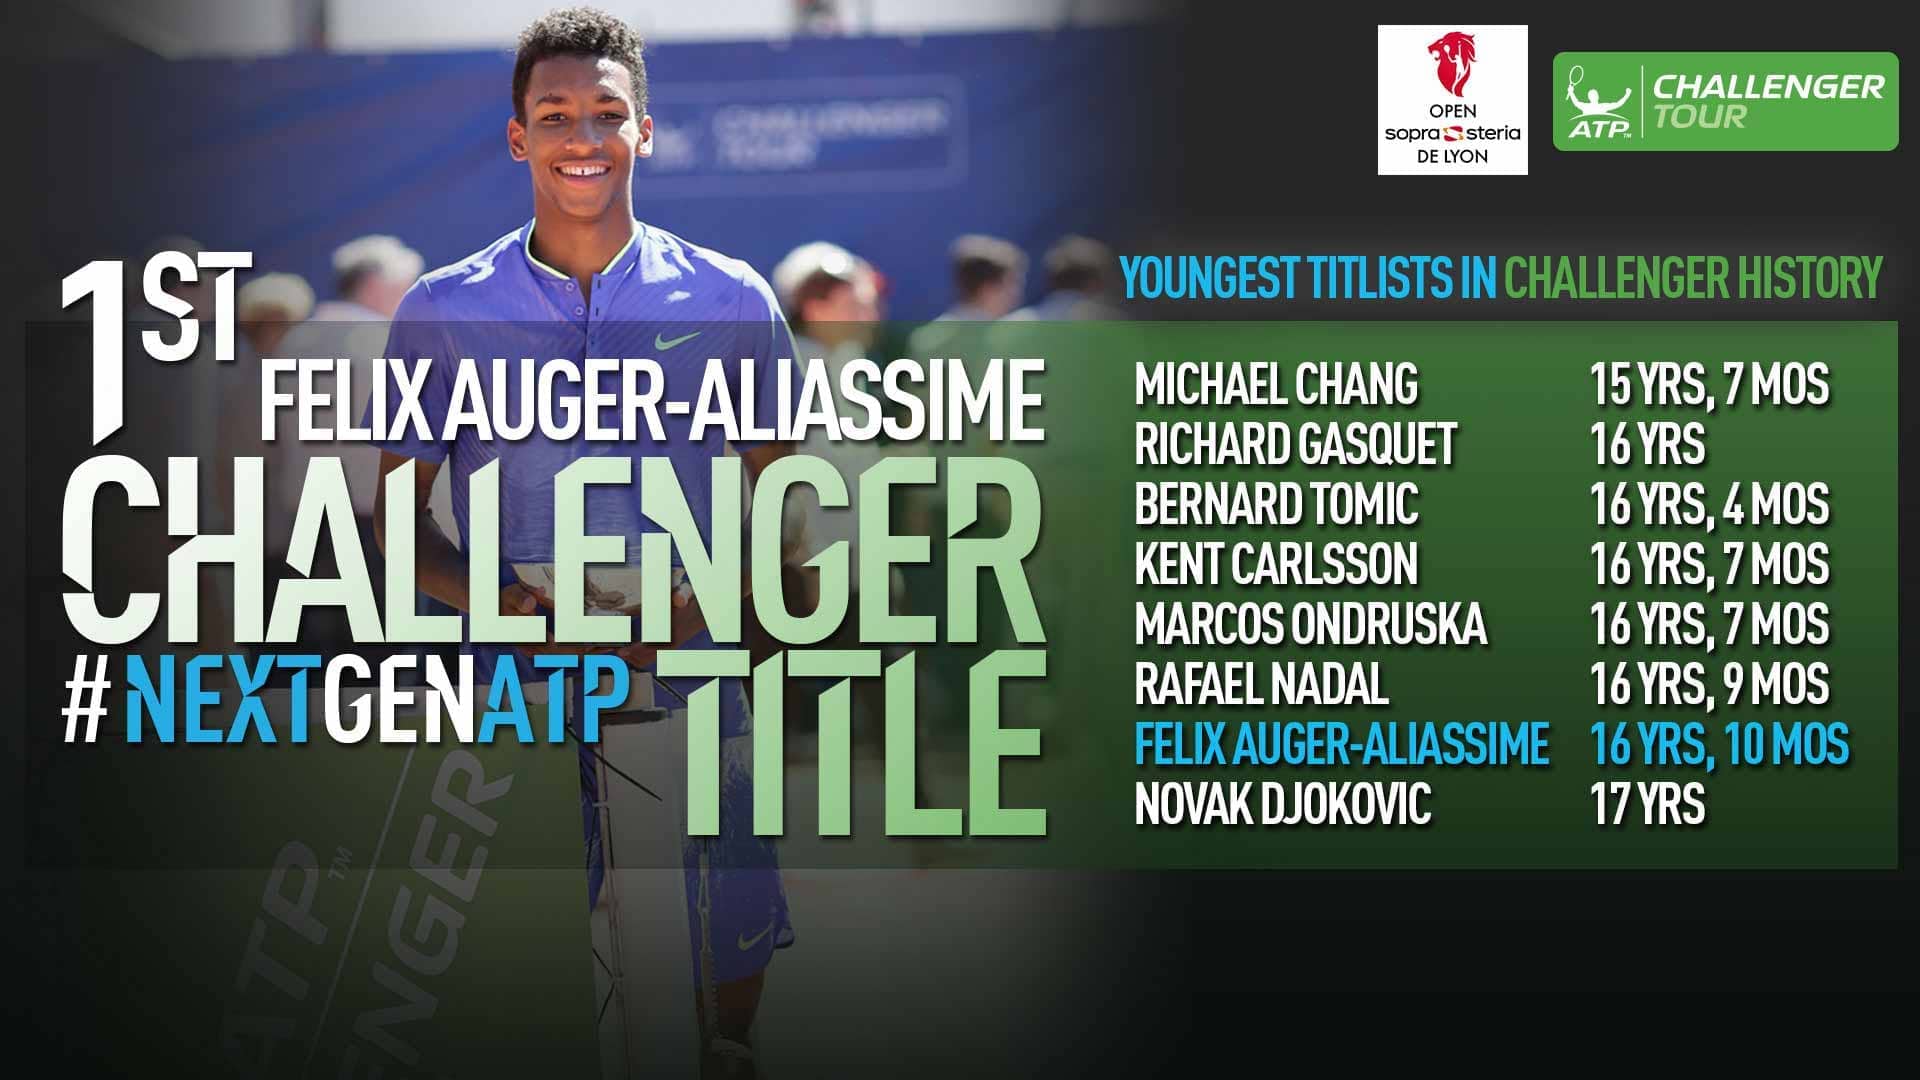 Felix Auger-Aliassime joins elite company in claiming his maiden ATP Challenger Tour title in Lyon, France.